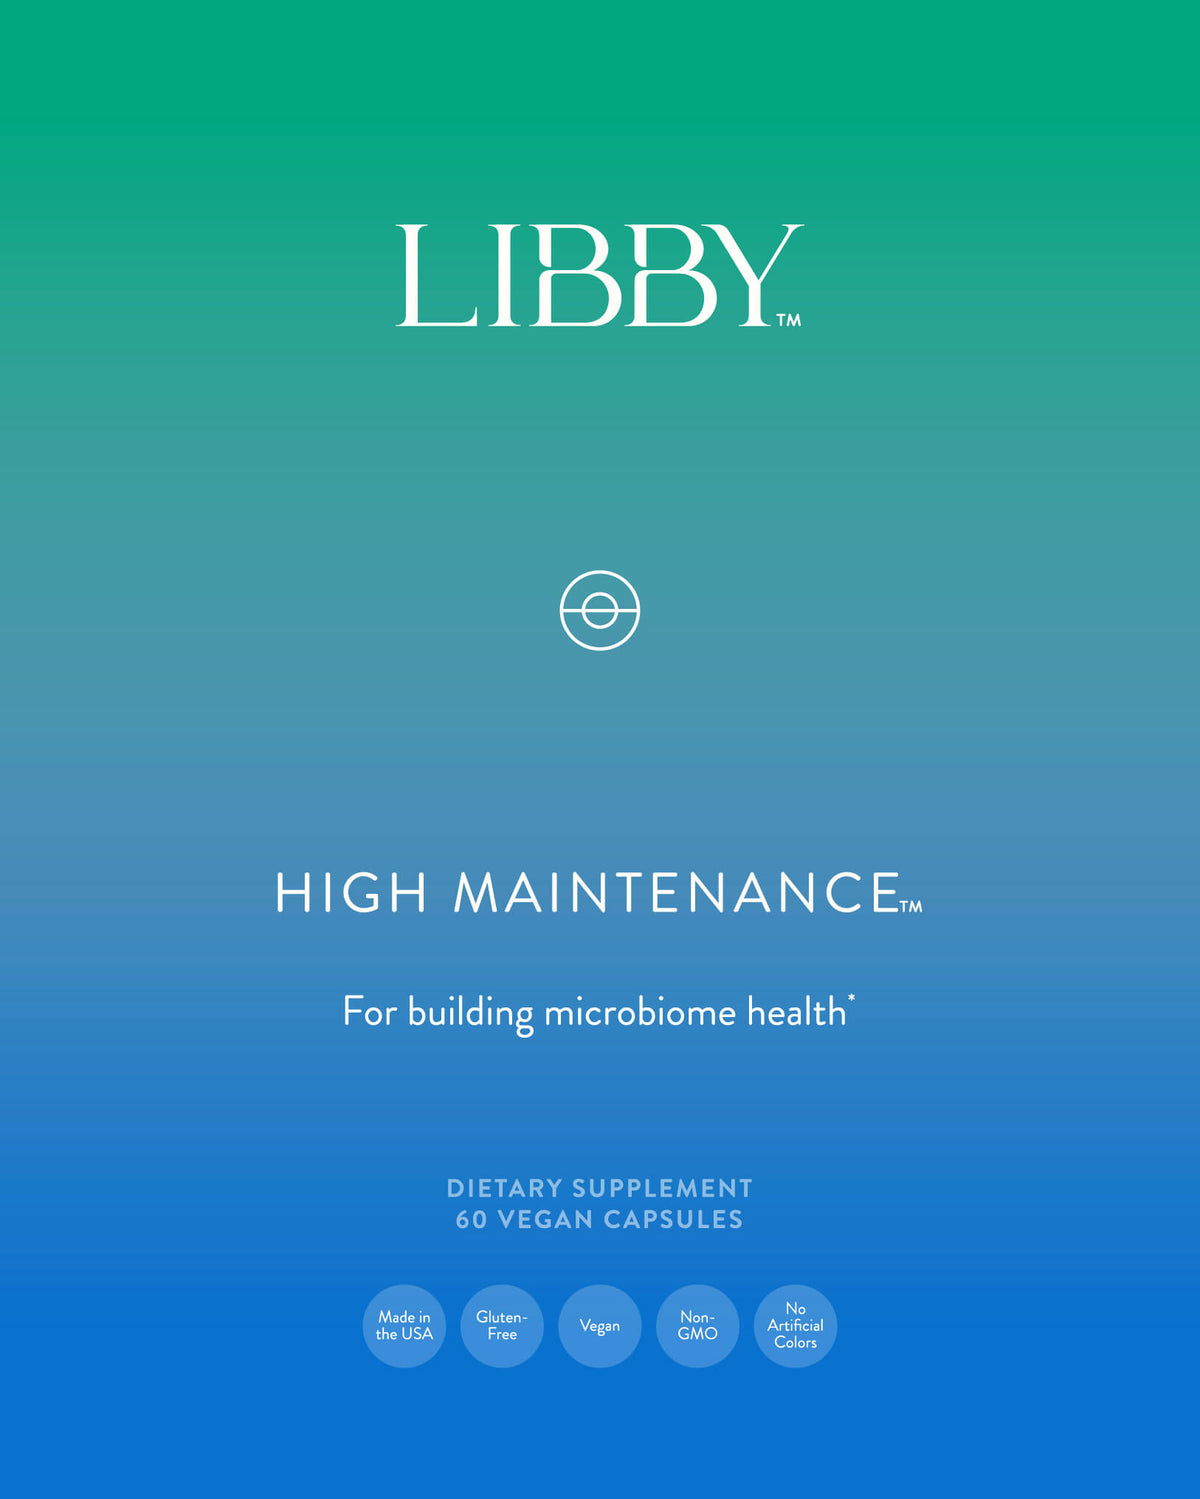 High Maintenance supplement from Libby for building microbiome health.